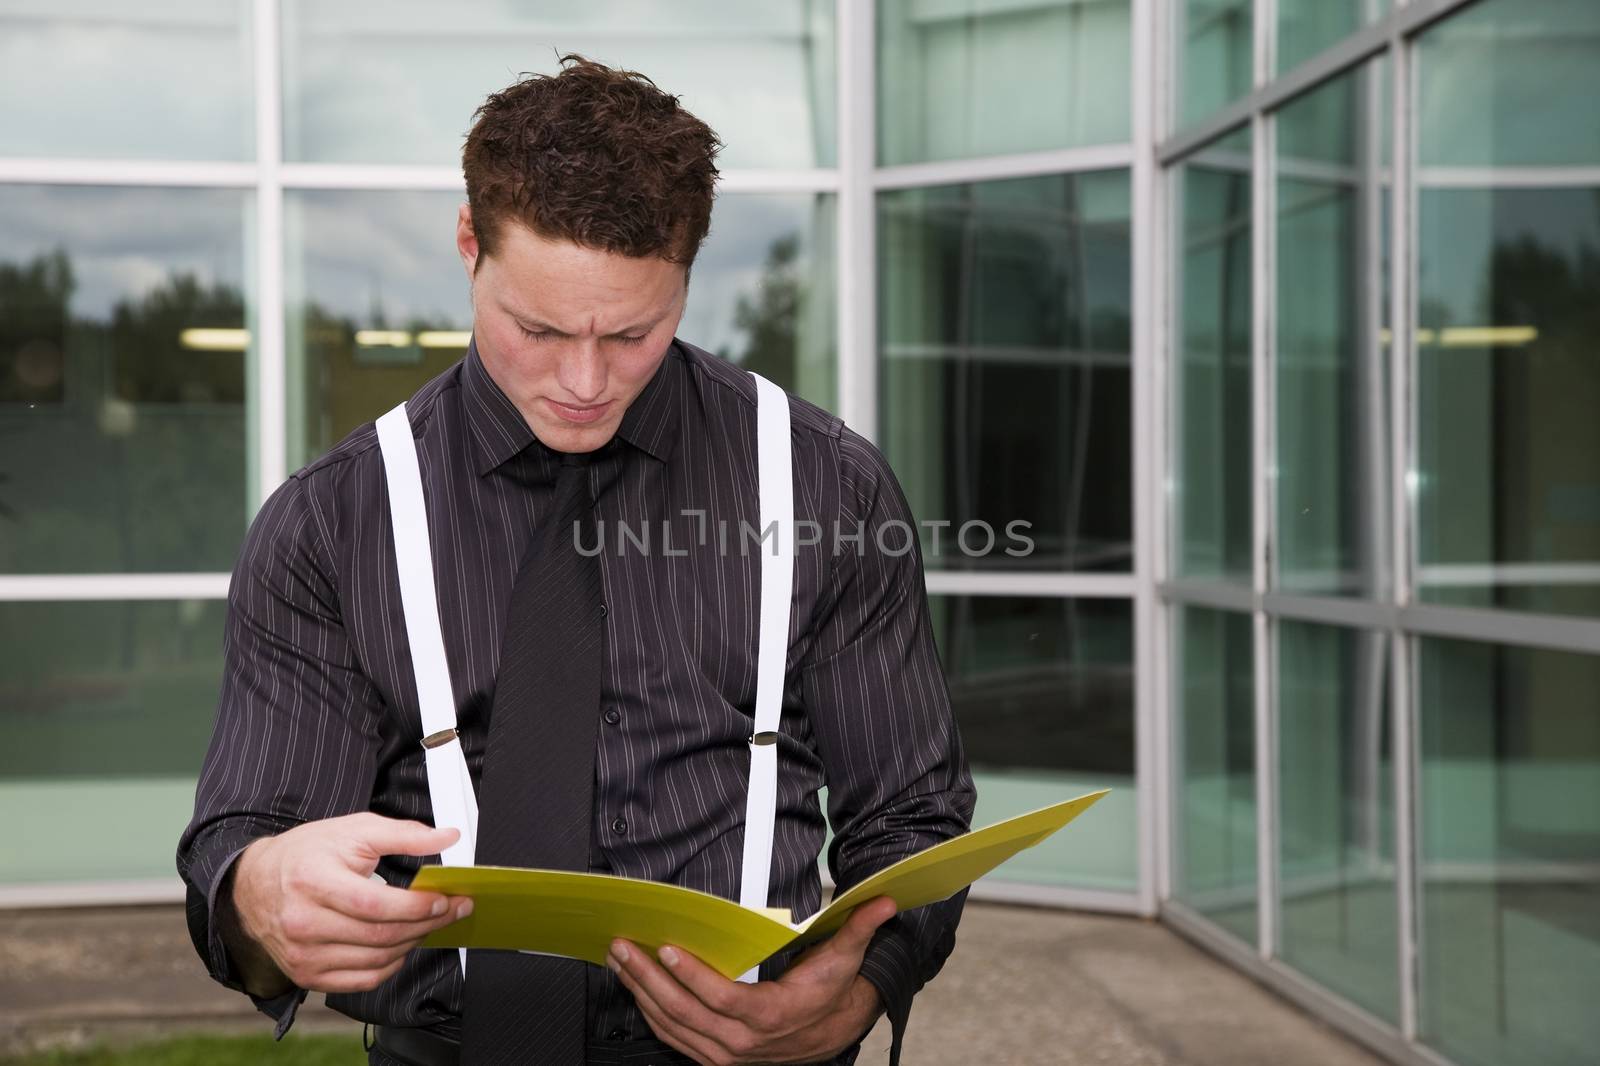 A businessman concentrating on the paperwork in his folder.